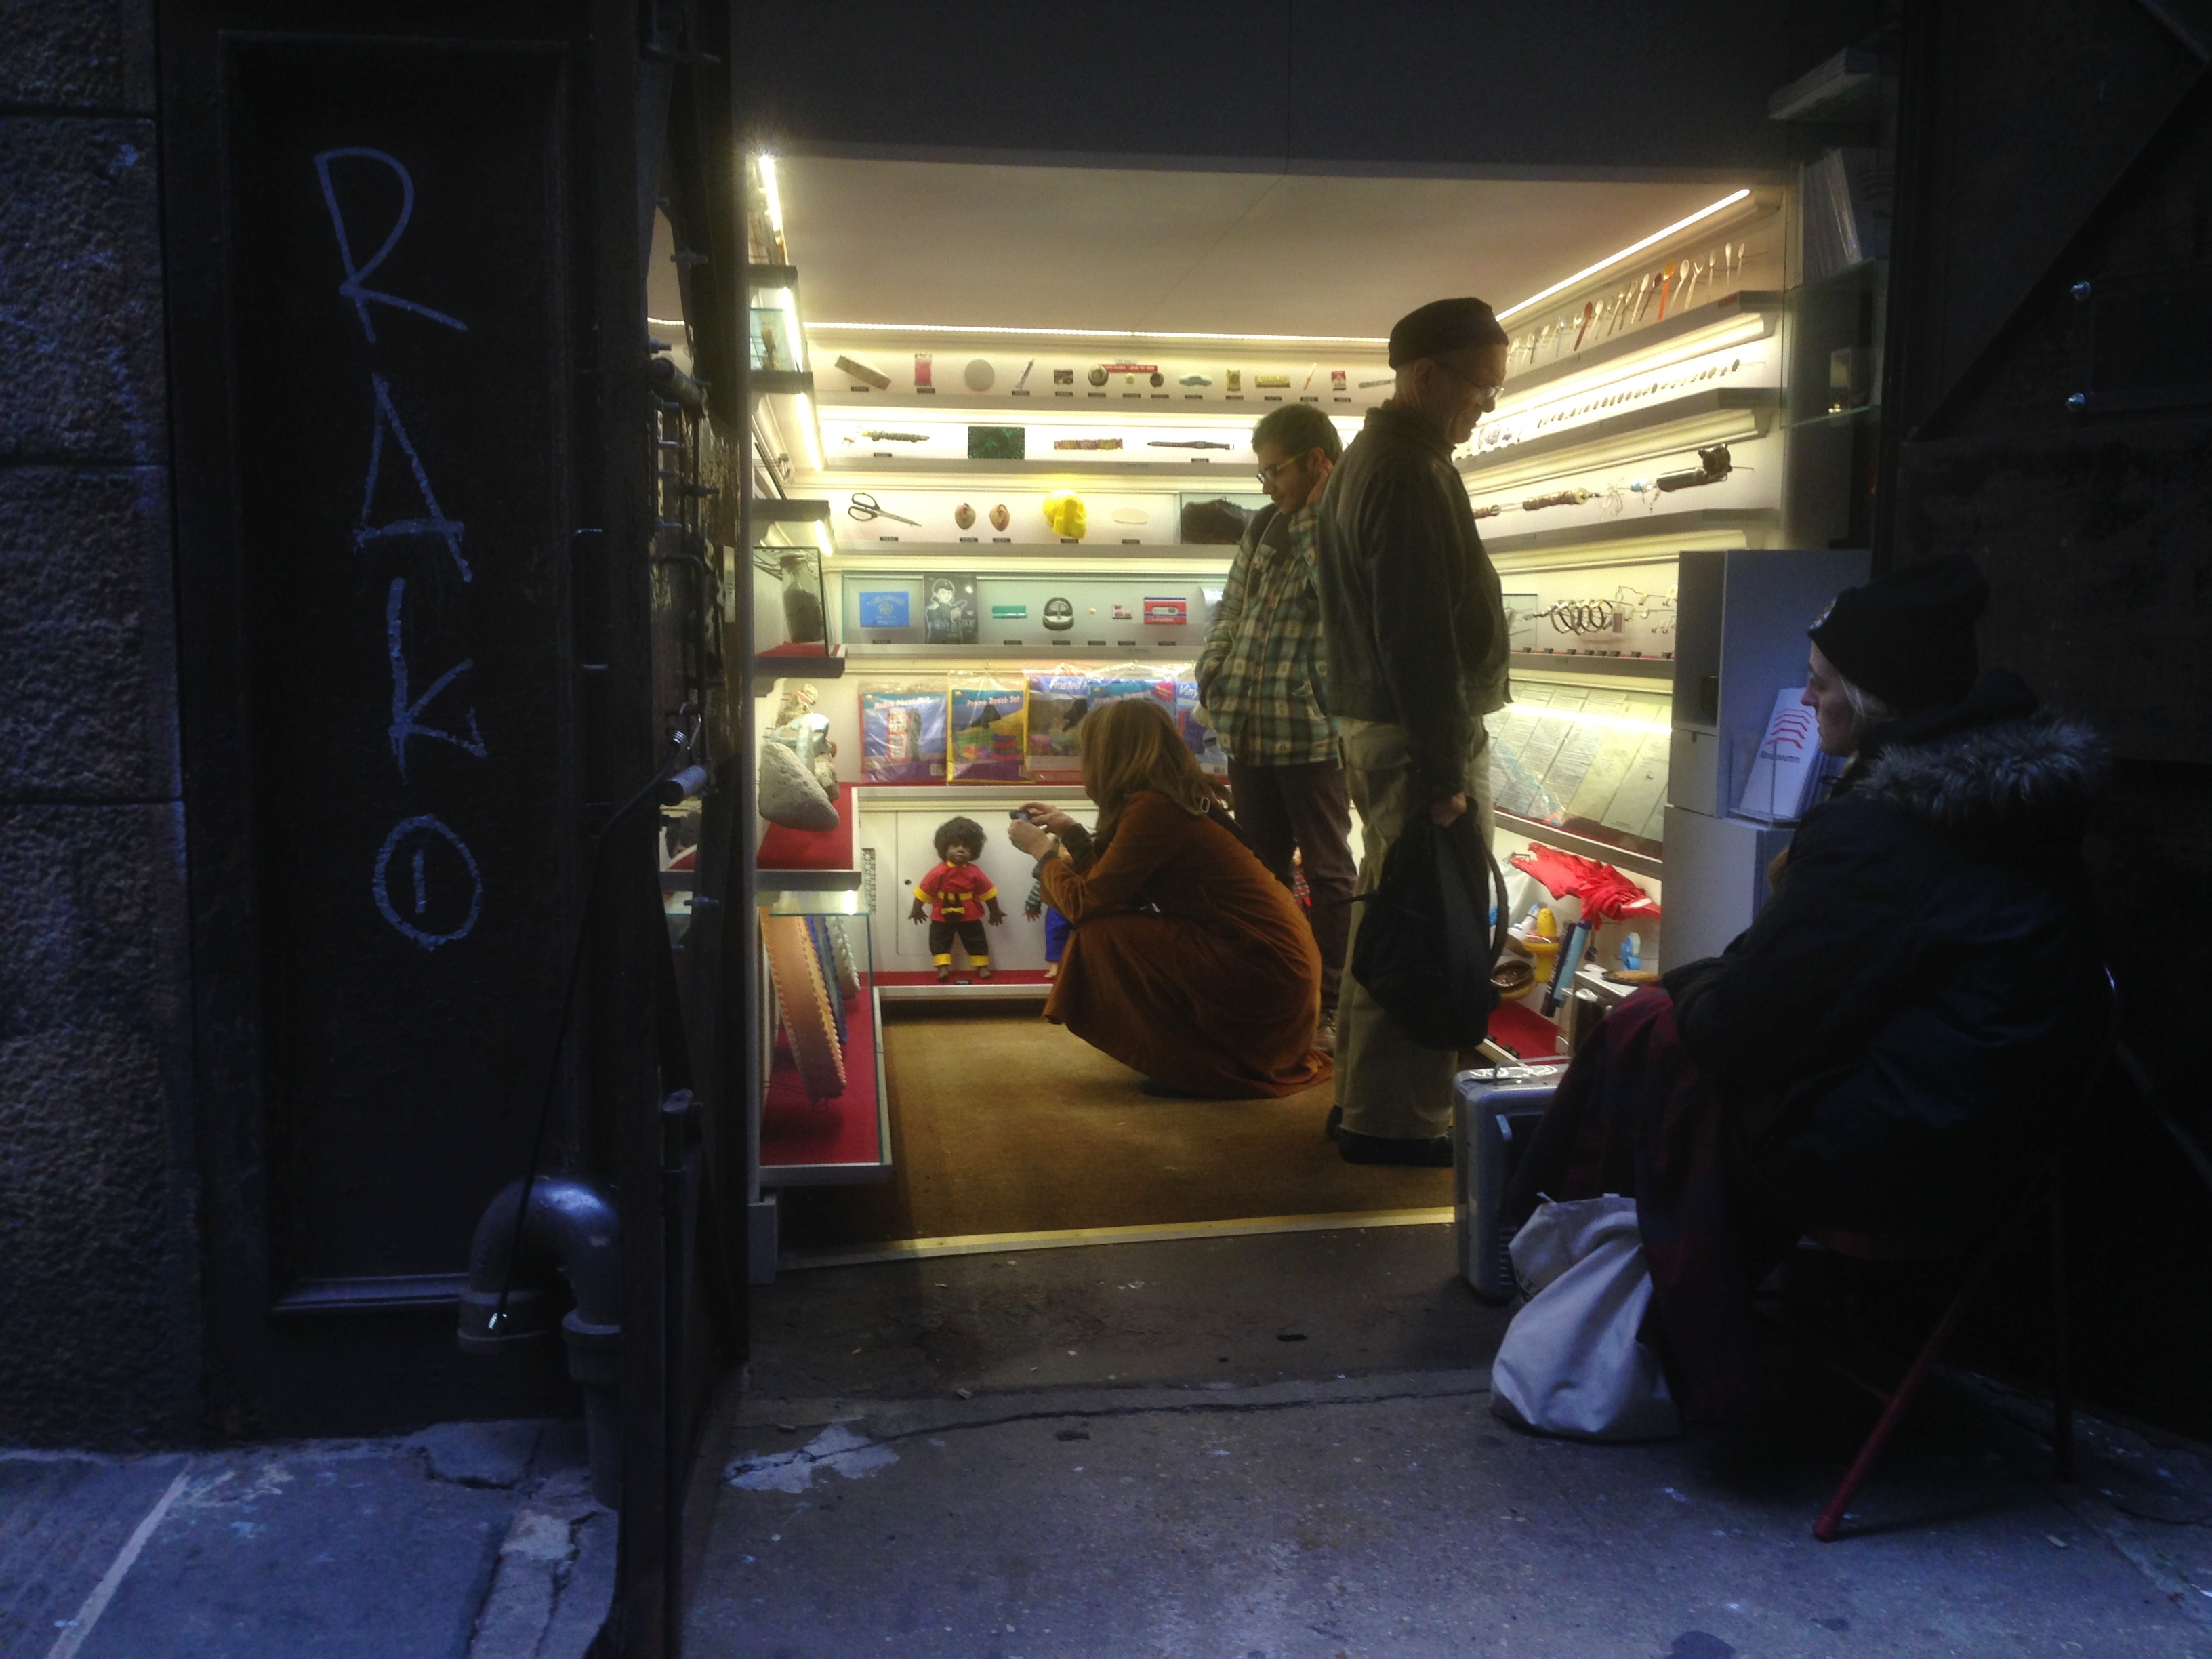 A tiny museum in a freight elevator in the middle of New York City alley